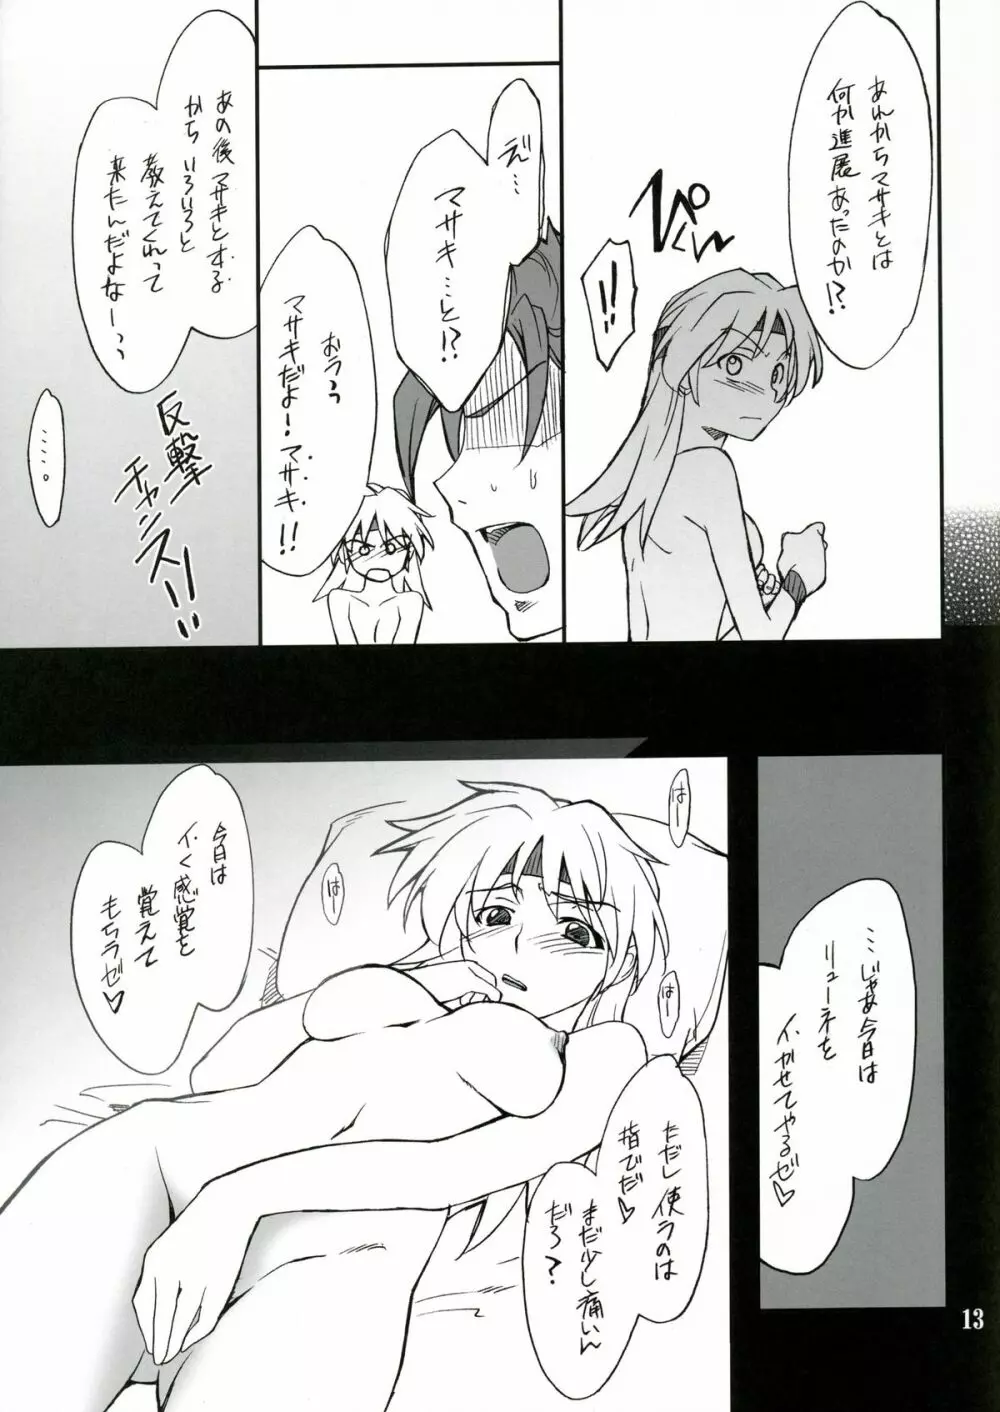 INTERMISSION_if code_07:RYUNE Page.12